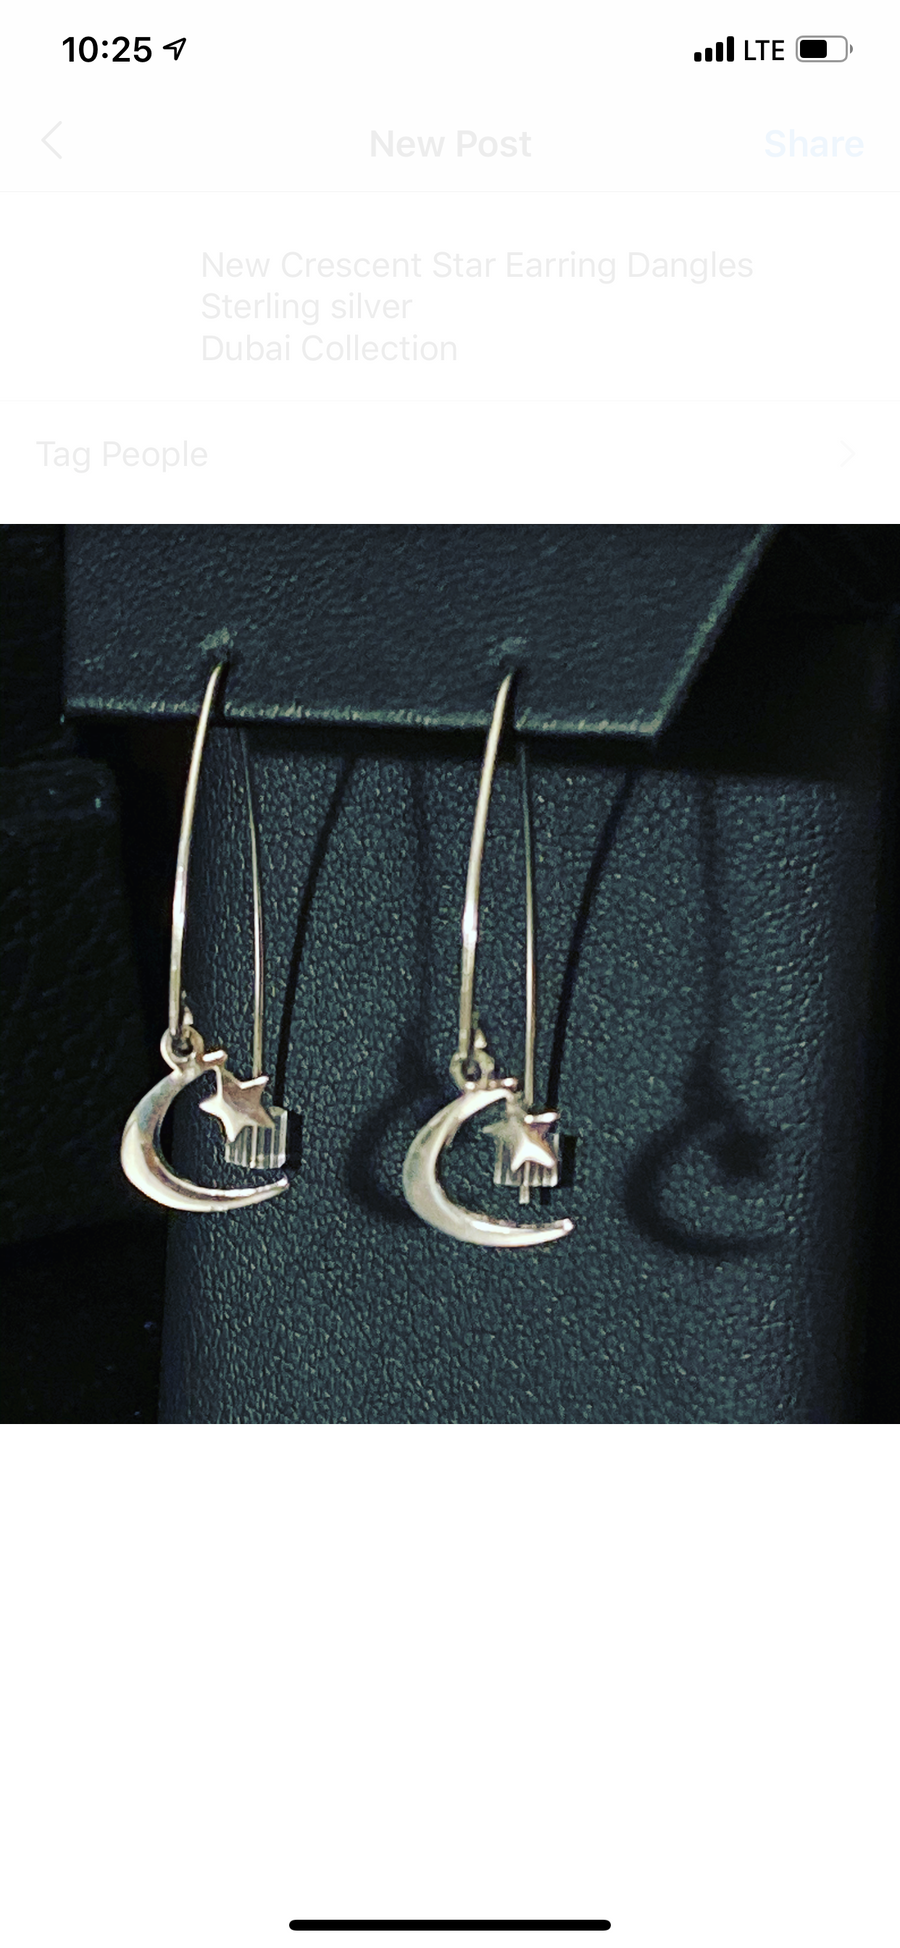 Sterling Silver Tiny "Crescent Star" D Hook Dangle Earrings 1 1/2 inch L - Michele Benjamin - Jewelry Design Fine Jewelry - Sterling Silver Earrings